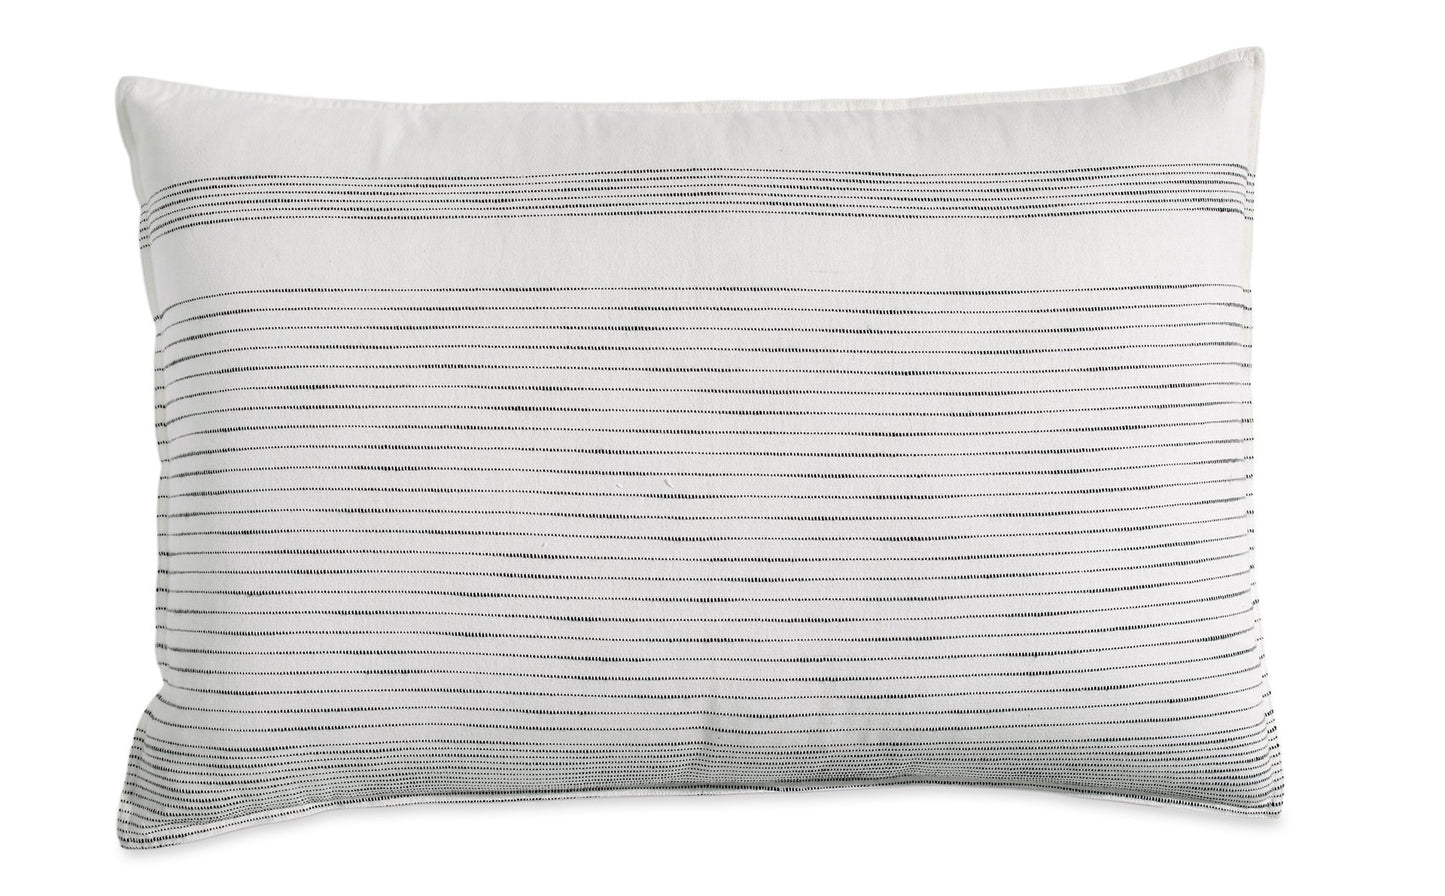 DKNY PURE Woven Stripe Duvet Bedding Collection